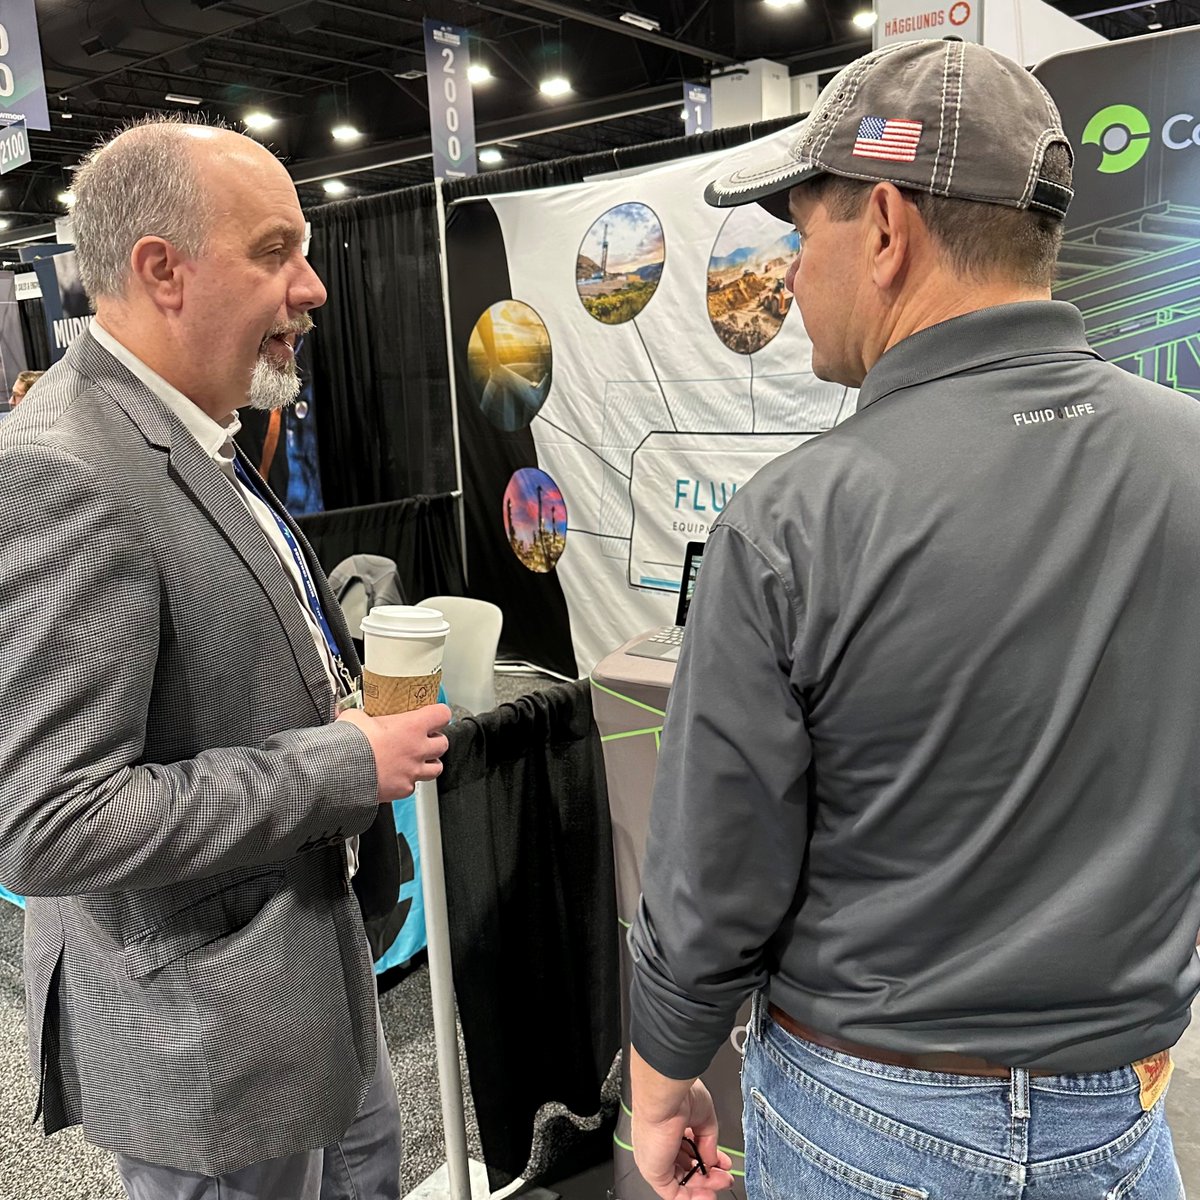 At the the MINEXCHANGE 2023 SME Annual Conference and Expo in Denver today. If you're attending, be sure to visit Josh and Joe at booth 2246!
#oilanalysis #minexchange2023 #smeconference2023 #tradeshowlife